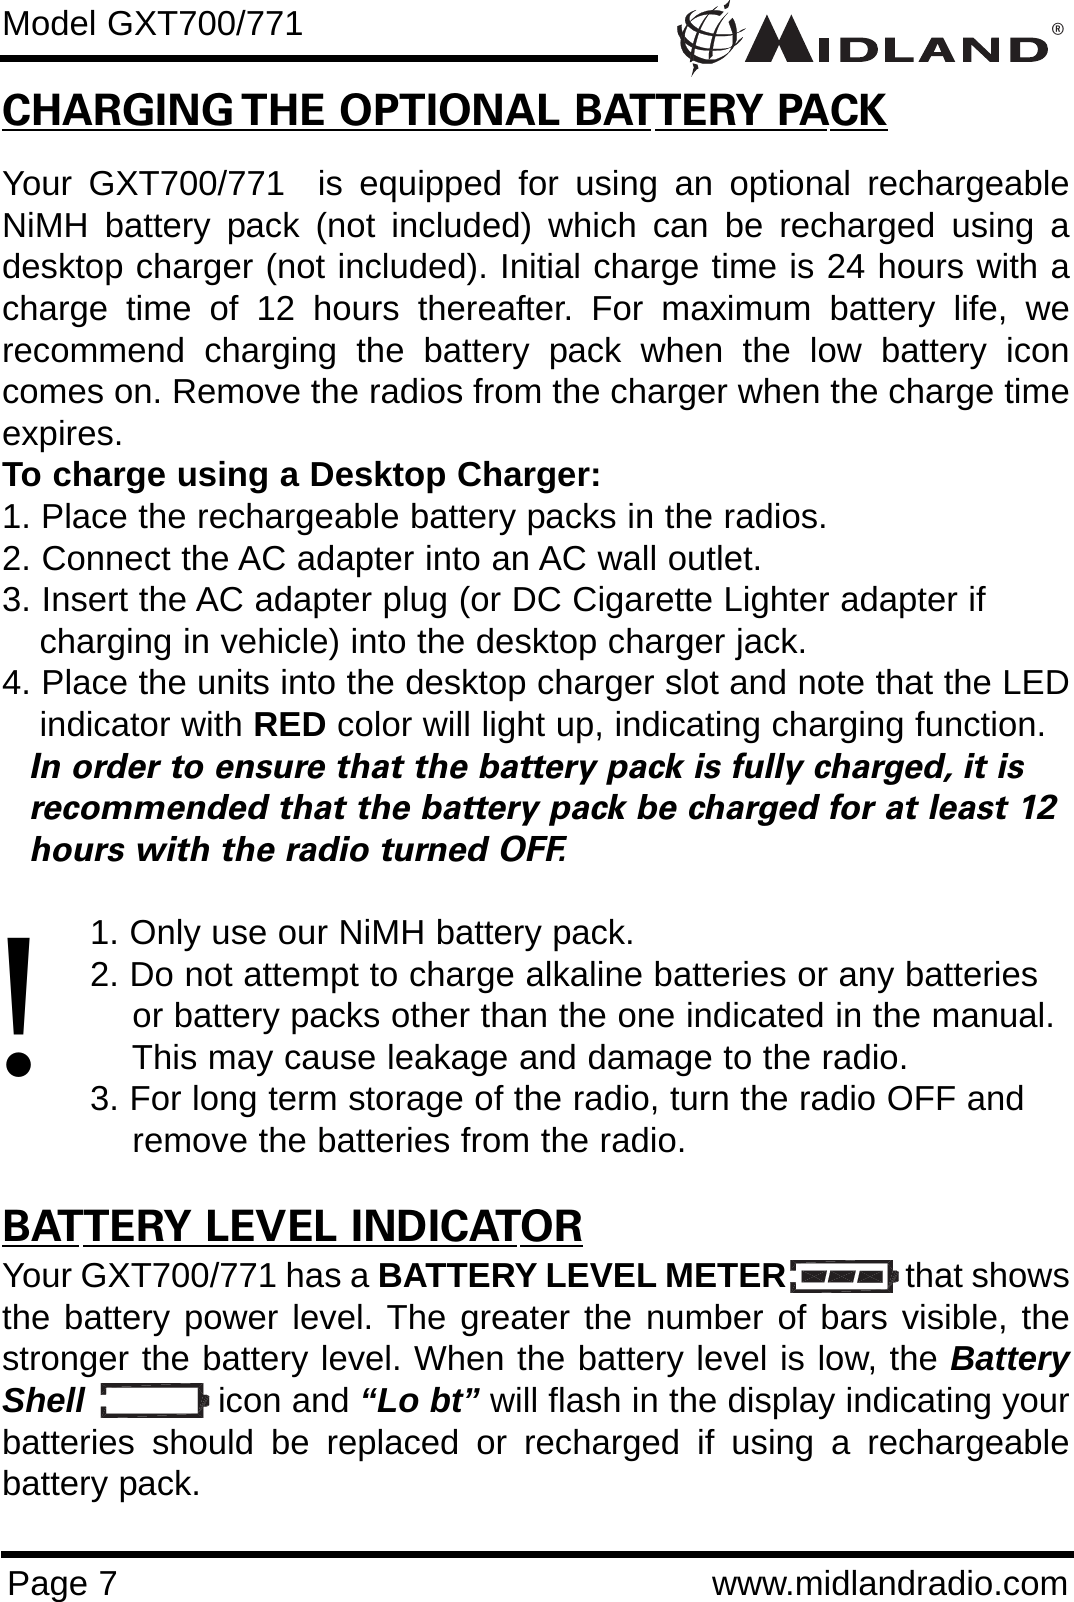 ®Page 7 www.midlandradio.comCHARGING THE OPTIONAL BATTERY PACKYour GXT700/771  is equipped for using an optional rechargeableNiMH battery pack (not included) which can be recharged using adesktop charger (not included). Initial charge time is 24 hours with acharge time of 12 hours thereafter. For maximum battery life, werecommend charging the battery pack when the low battery iconcomes on. Remove the radios from the charger when the charge timeexpires.To charge using a Desktop Charger:1. Place the rechargeable battery packs in the radios.2. Connect the AC adapter into an AC wall outlet.3. Insert the AC adapter plug (or DC Cigarette Lighter adapter if    charging in vehicle) into the desktop charger jack.4. Place the units into the desktop charger slot and note that the LEDindicator with RED color will light up, indicating charging function. In order to ensure that the battery pack is fully charged, it is  recommended that the battery pack be charged for at least 12 hours with the radio turned OFF.1. Only use our NiMH battery pack.2. Do not attempt to charge alkaline batteries or any batteries or battery packs other than the one indicated in the manual. This may cause leakage and damage to the radio.3. For long term storage of the radio, turn the radio OFF and remove the batteries from the radio.BATTERY LEVEL INDICATORYour GXT700/771 has a BATTERY LEVEL METER that showsthe battery power level. The greater the number of bars visible, thestronger the battery level. When the battery level is low, the BatteryShell icon and “Lo bt” will flash in the display indicating yourbatteries should be replaced or recharged if using a rechargeablebattery pack.Model GXT700/771!